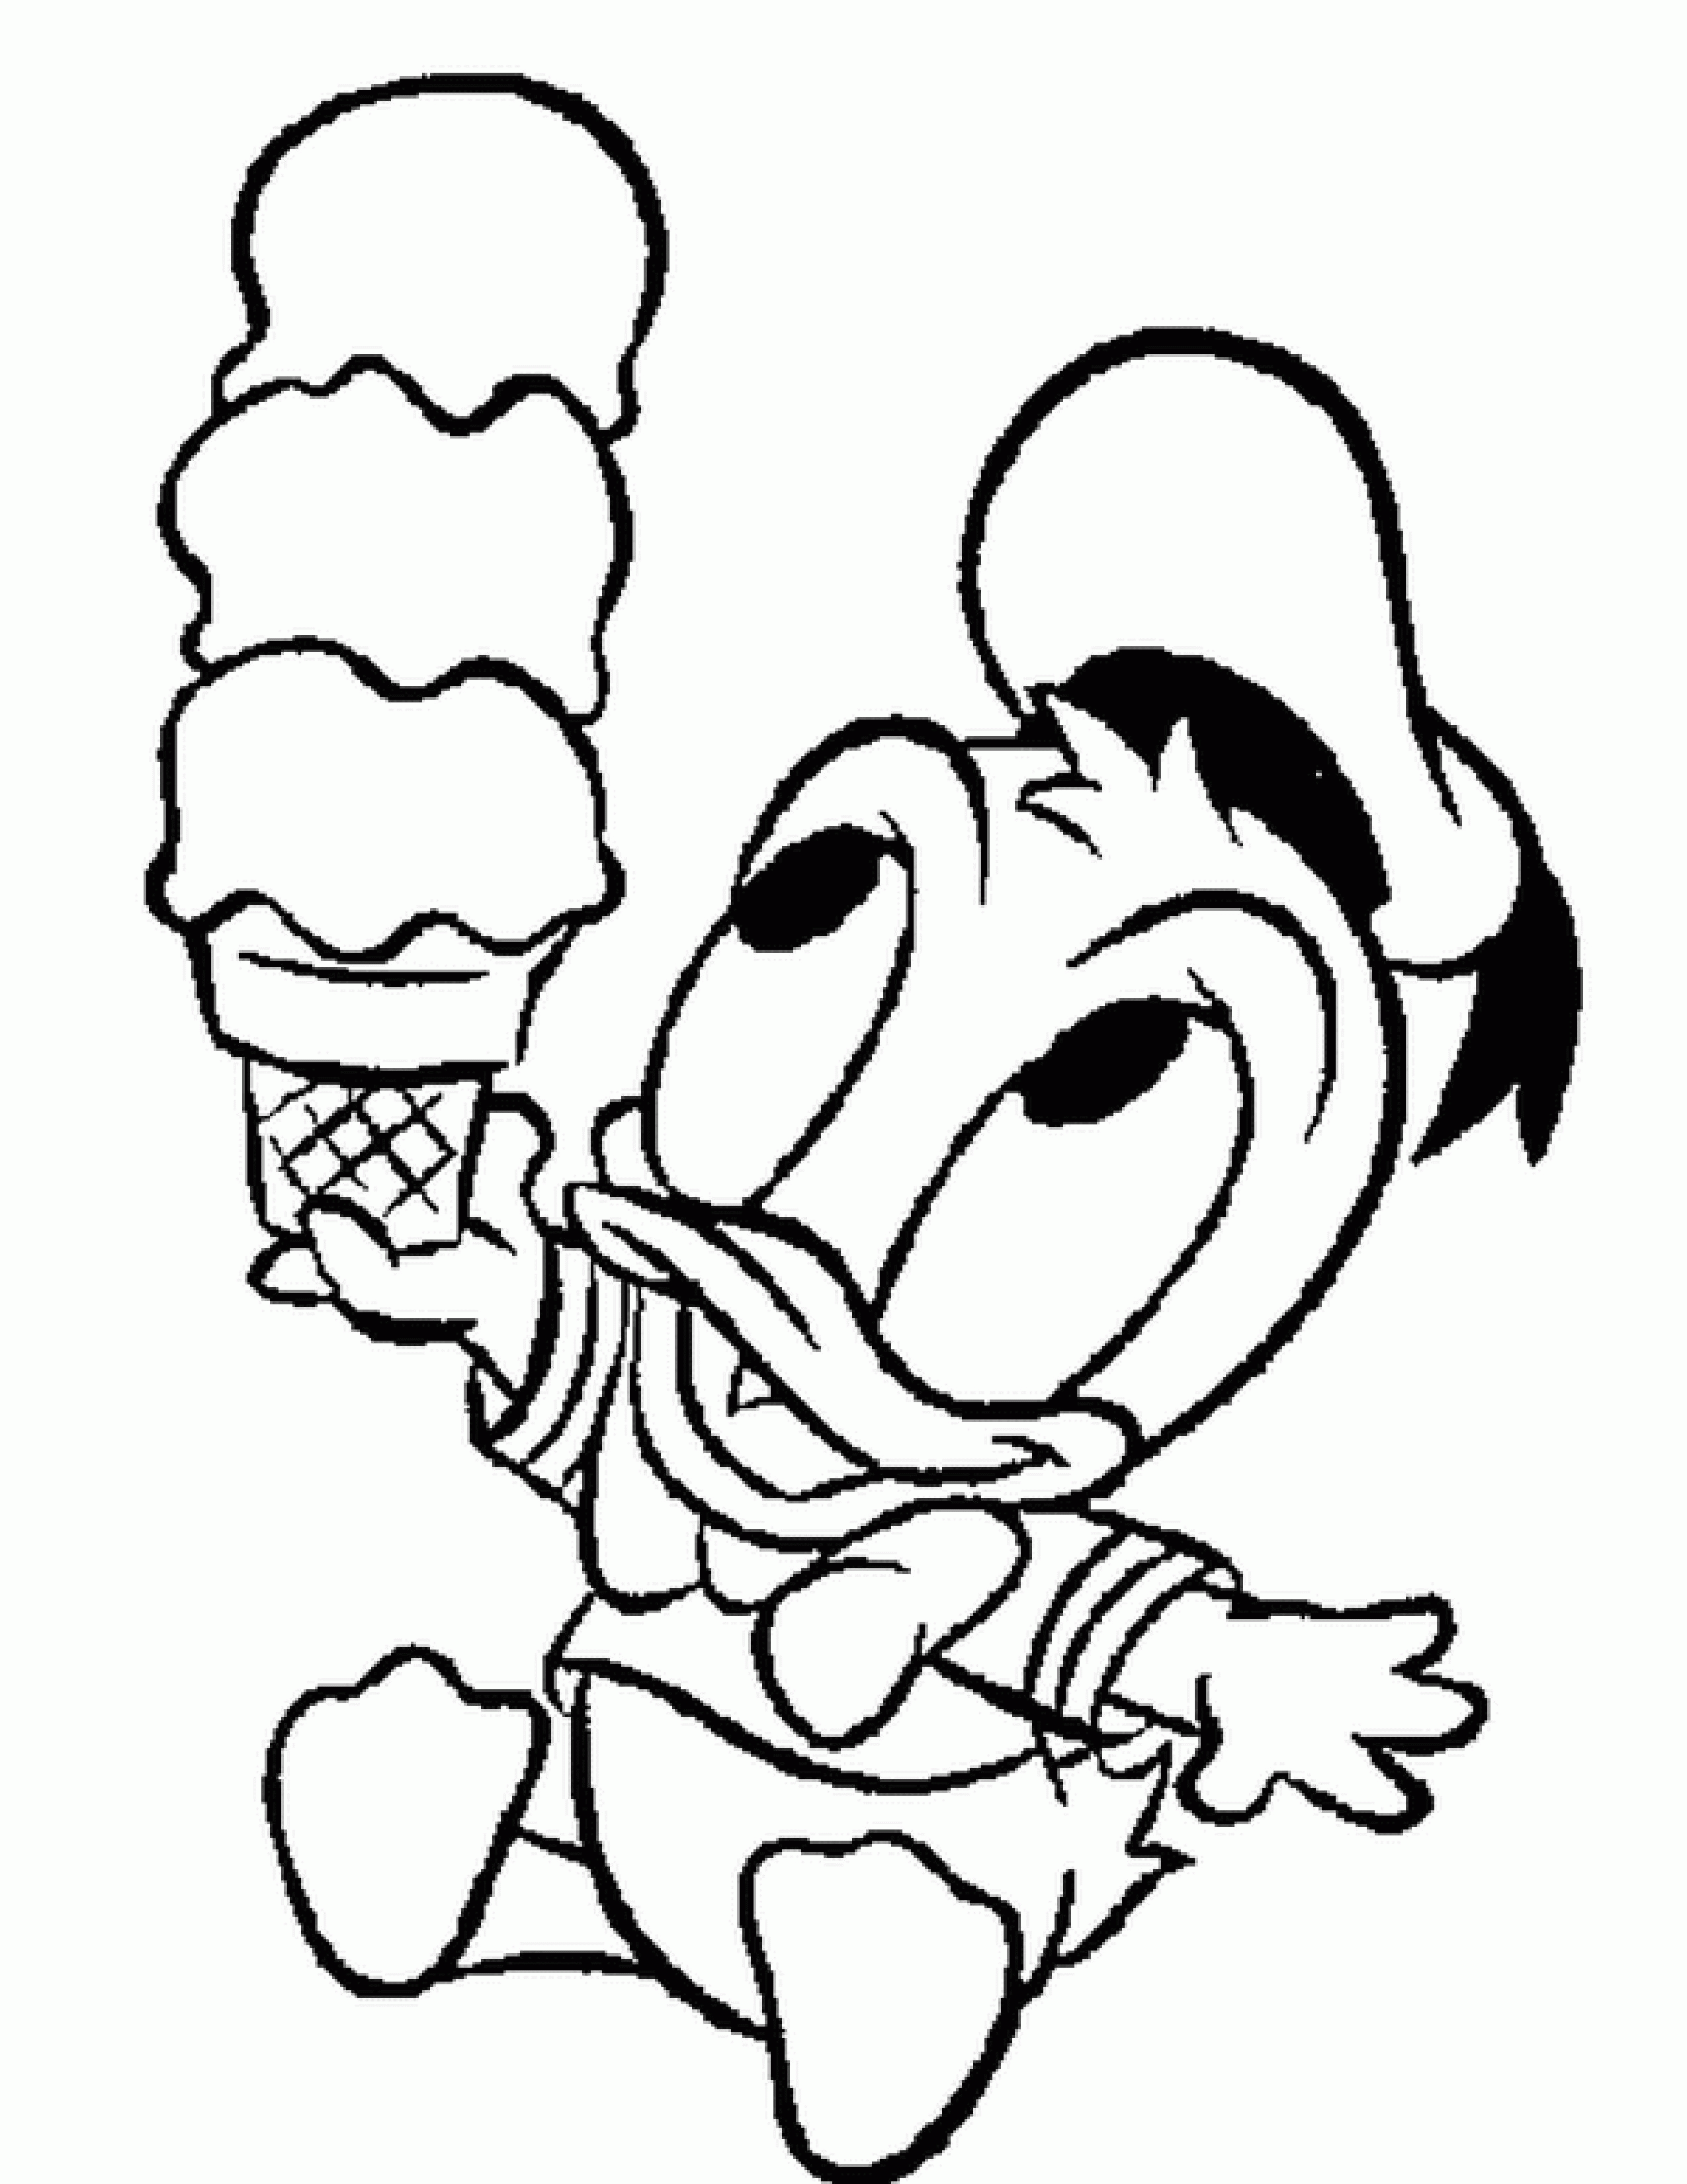 Disney Characters Coloring Pages - Coloring Page Photos